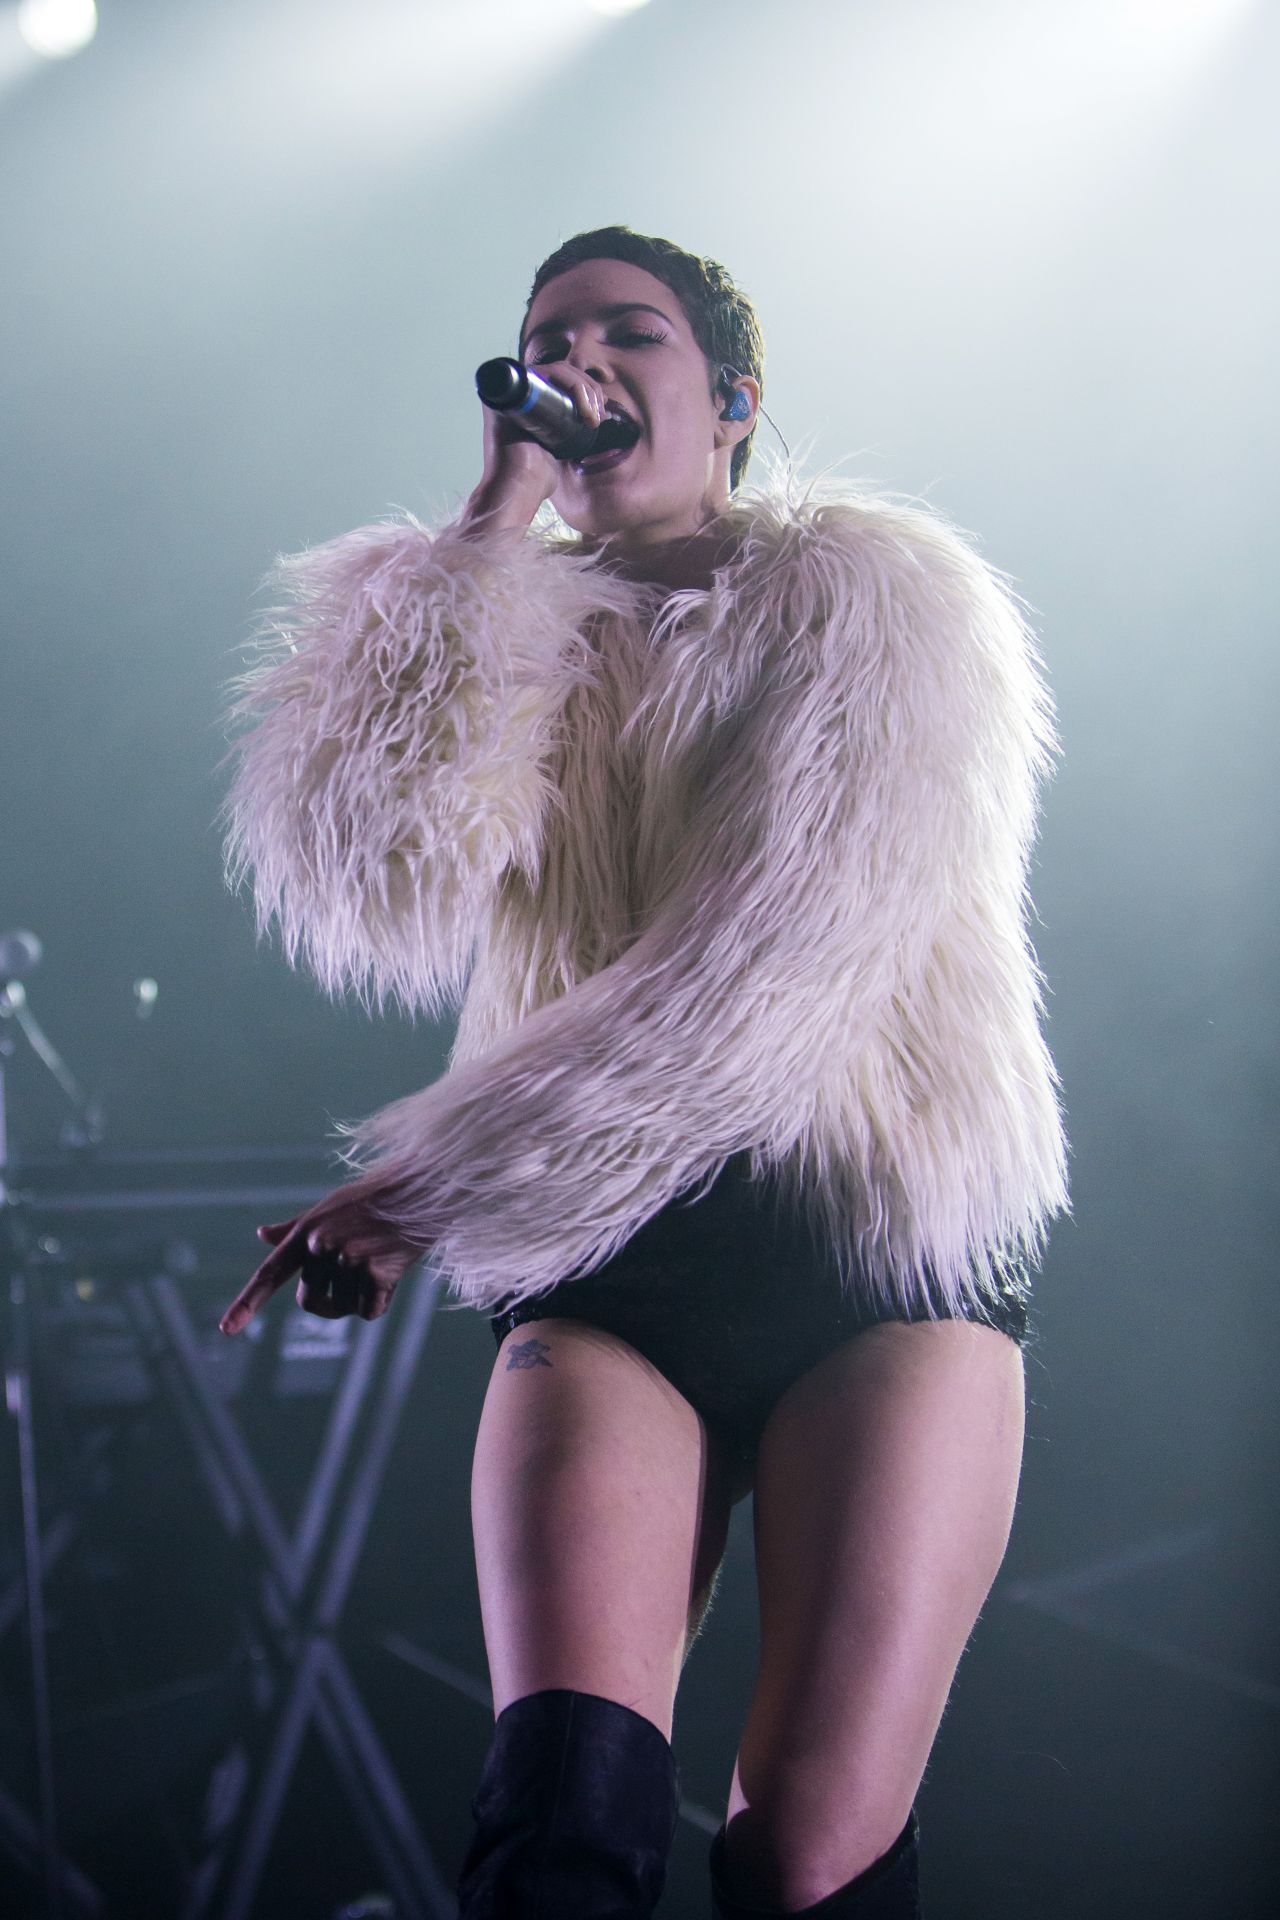 halsey-performing-at-o2-academy-brixton-in-london-february-2016-3